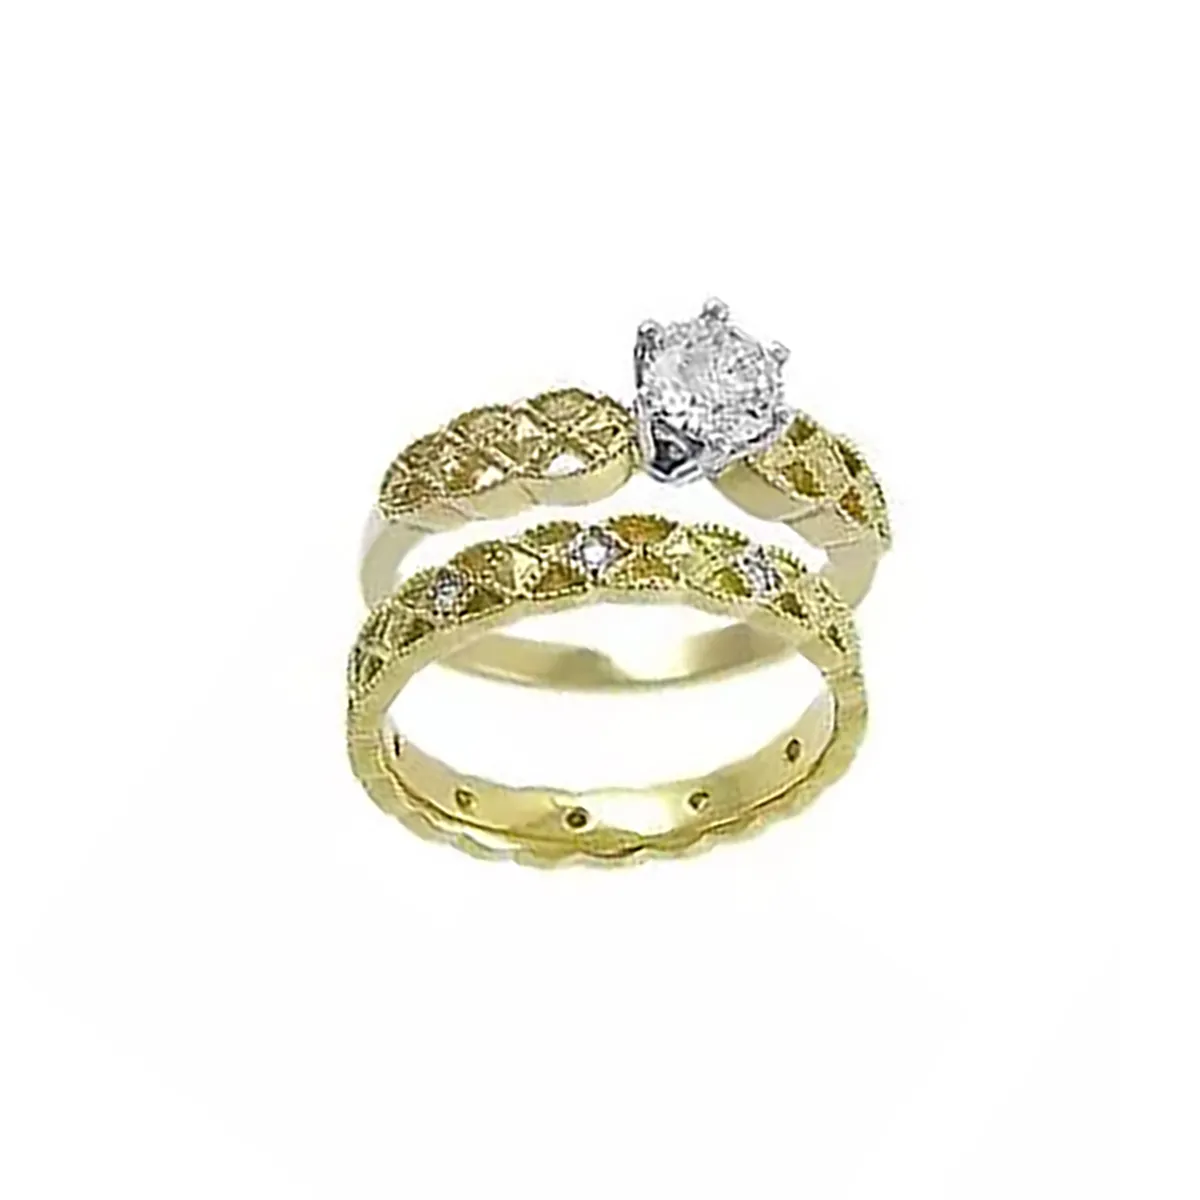 Gold Celtic Solitaire Wedding Ring Set